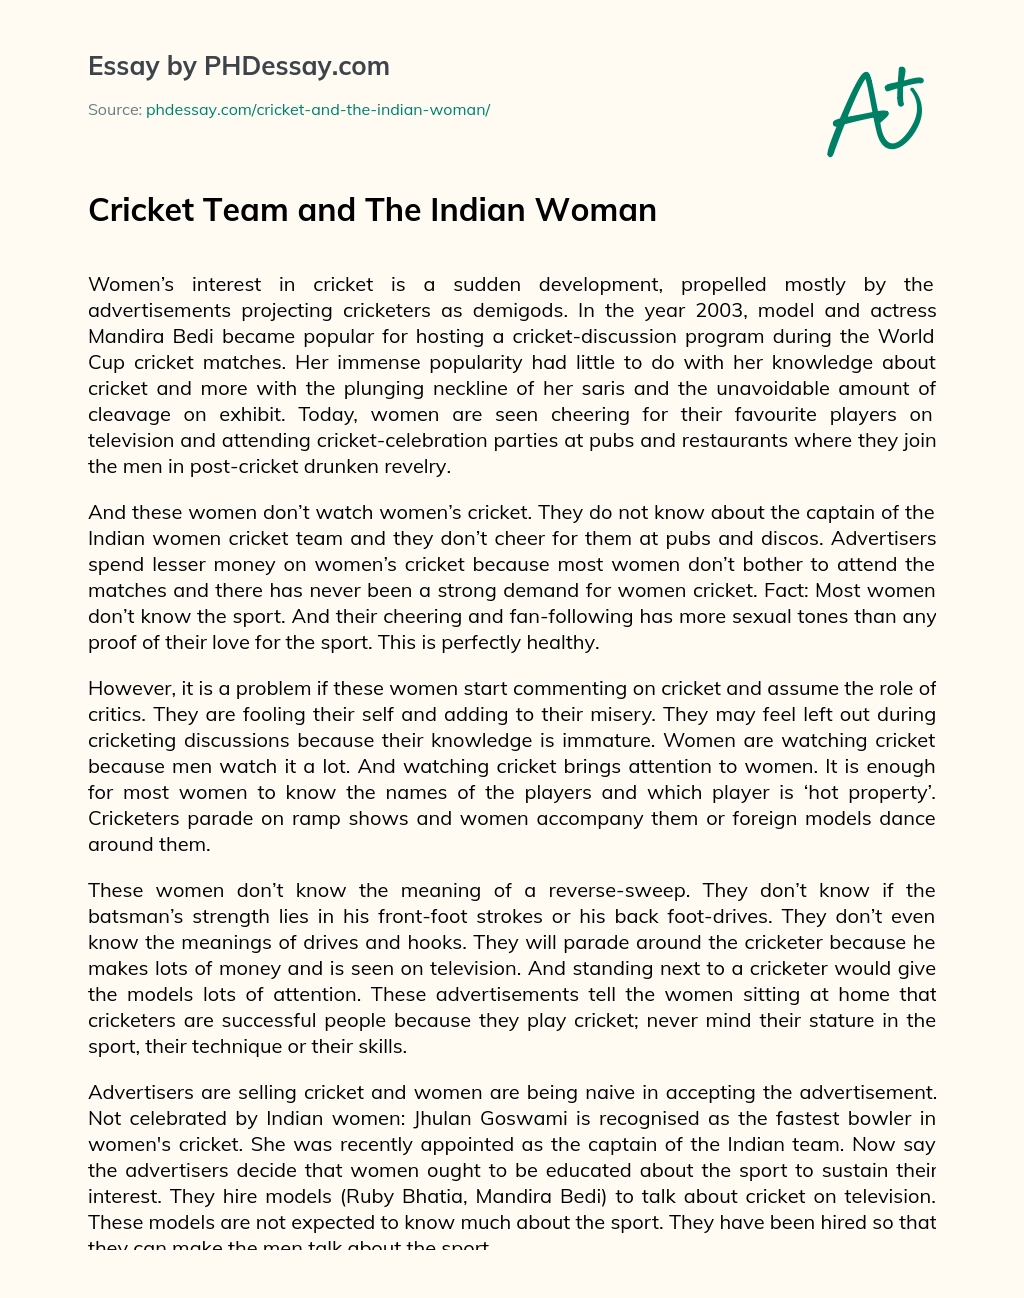 Cricket Team and The Indian Woman essay